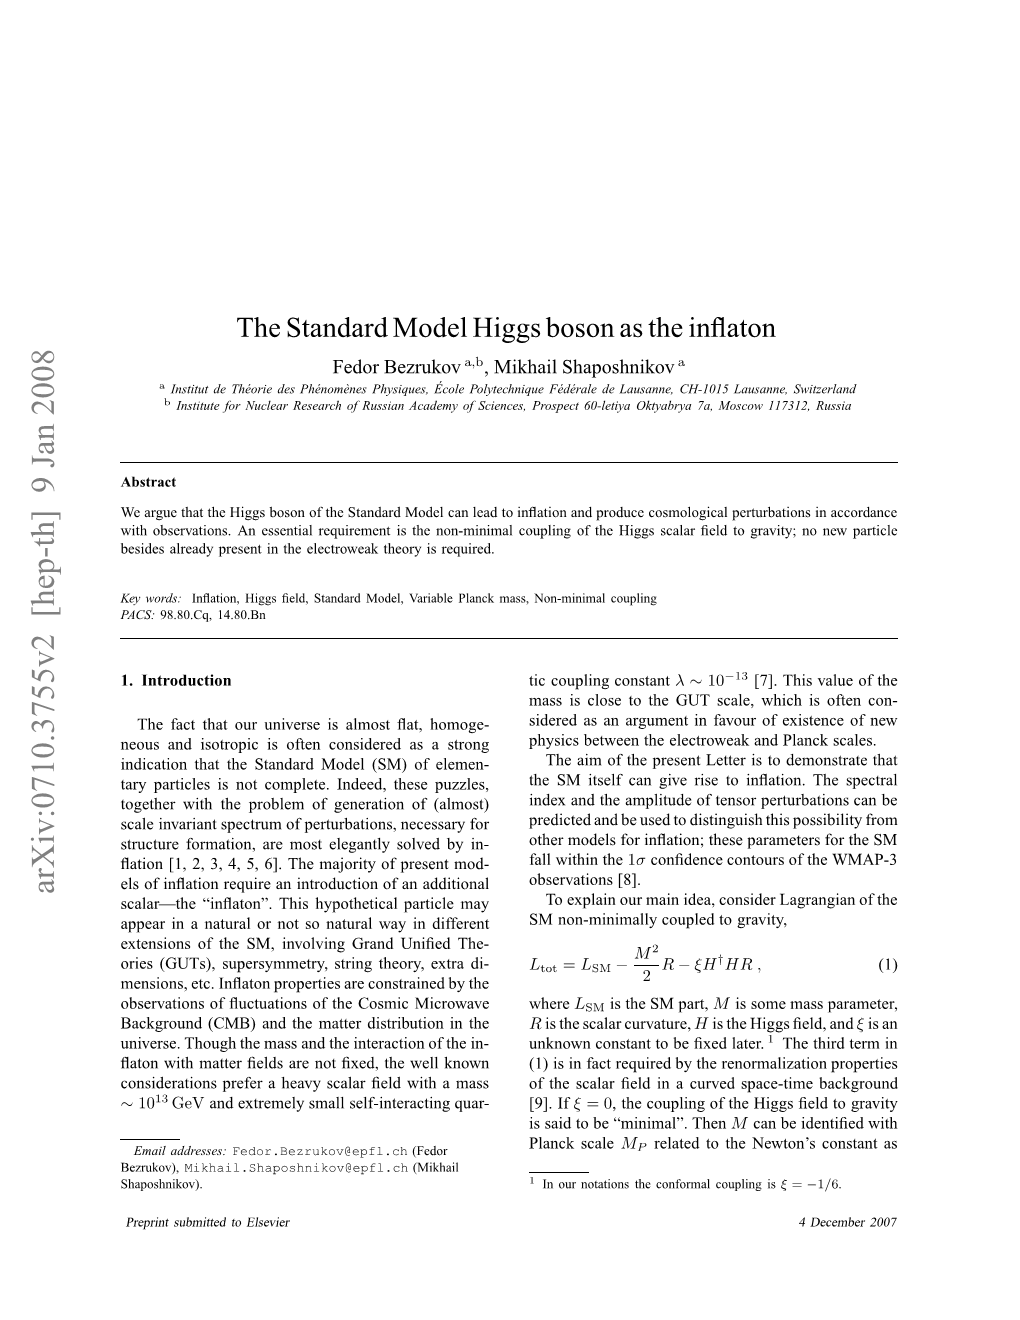 The Standard Model Higgs Boson As the Inflaton